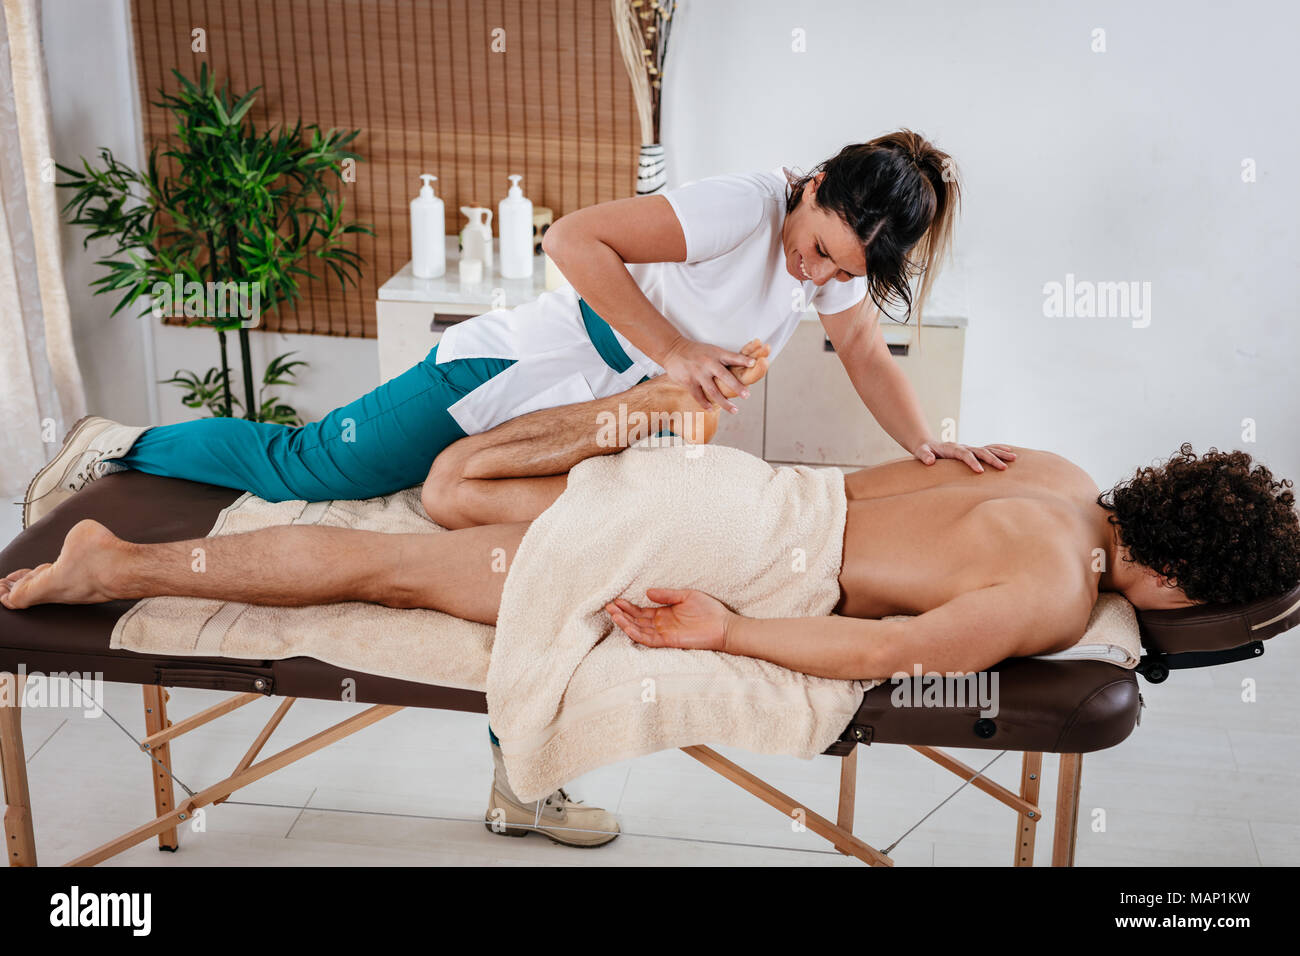 Handsome man lying down on massage table and getting healthy leg massage by young female therapist in the spa center. Stock Photo